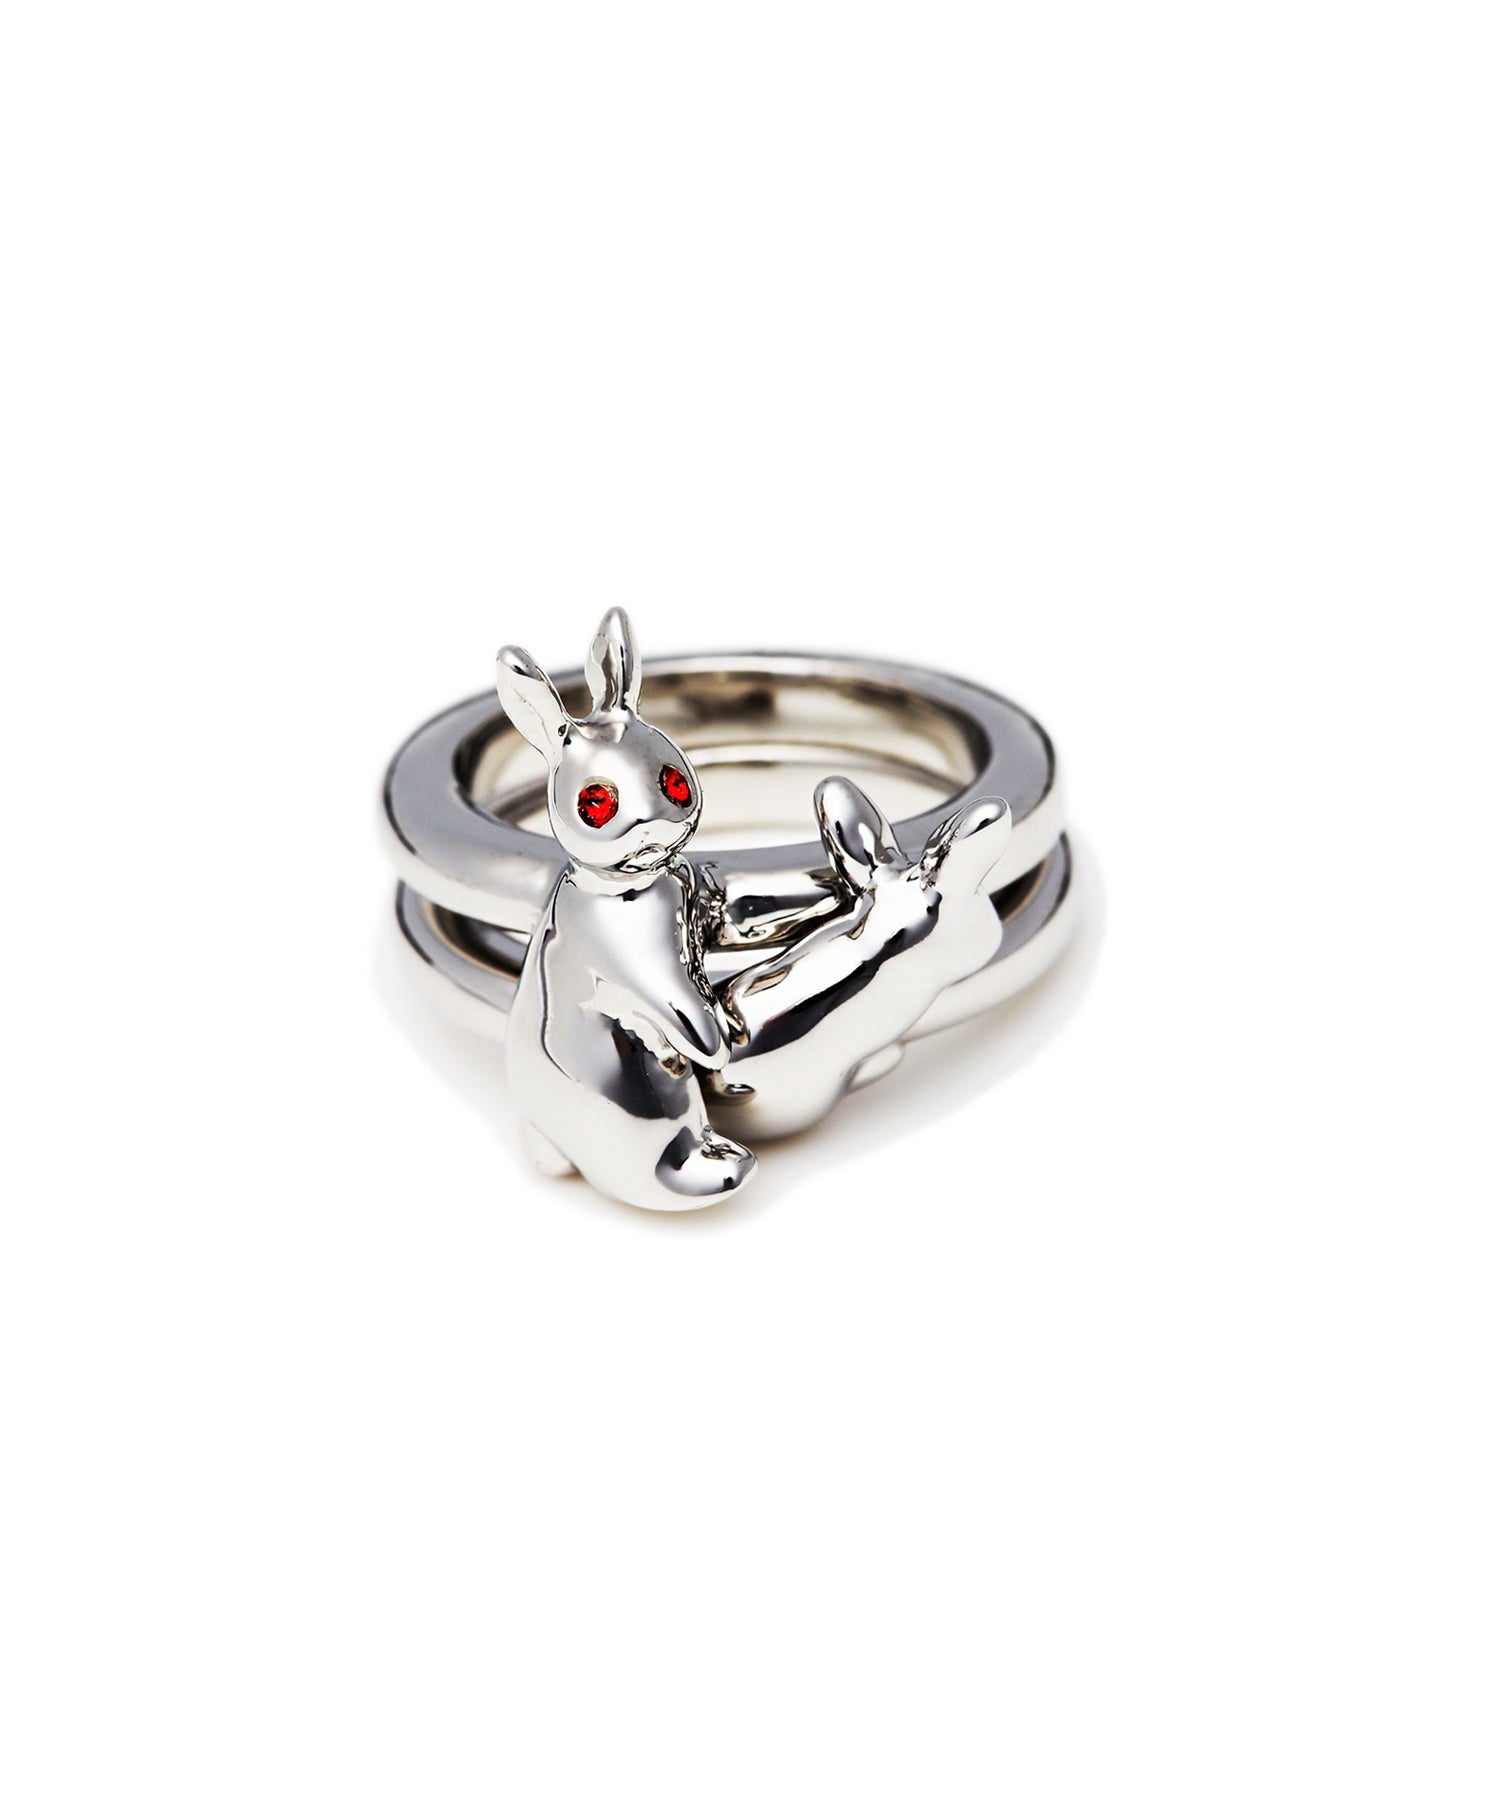 #FR2 Crystal Fxxking Rabbits Double Ring